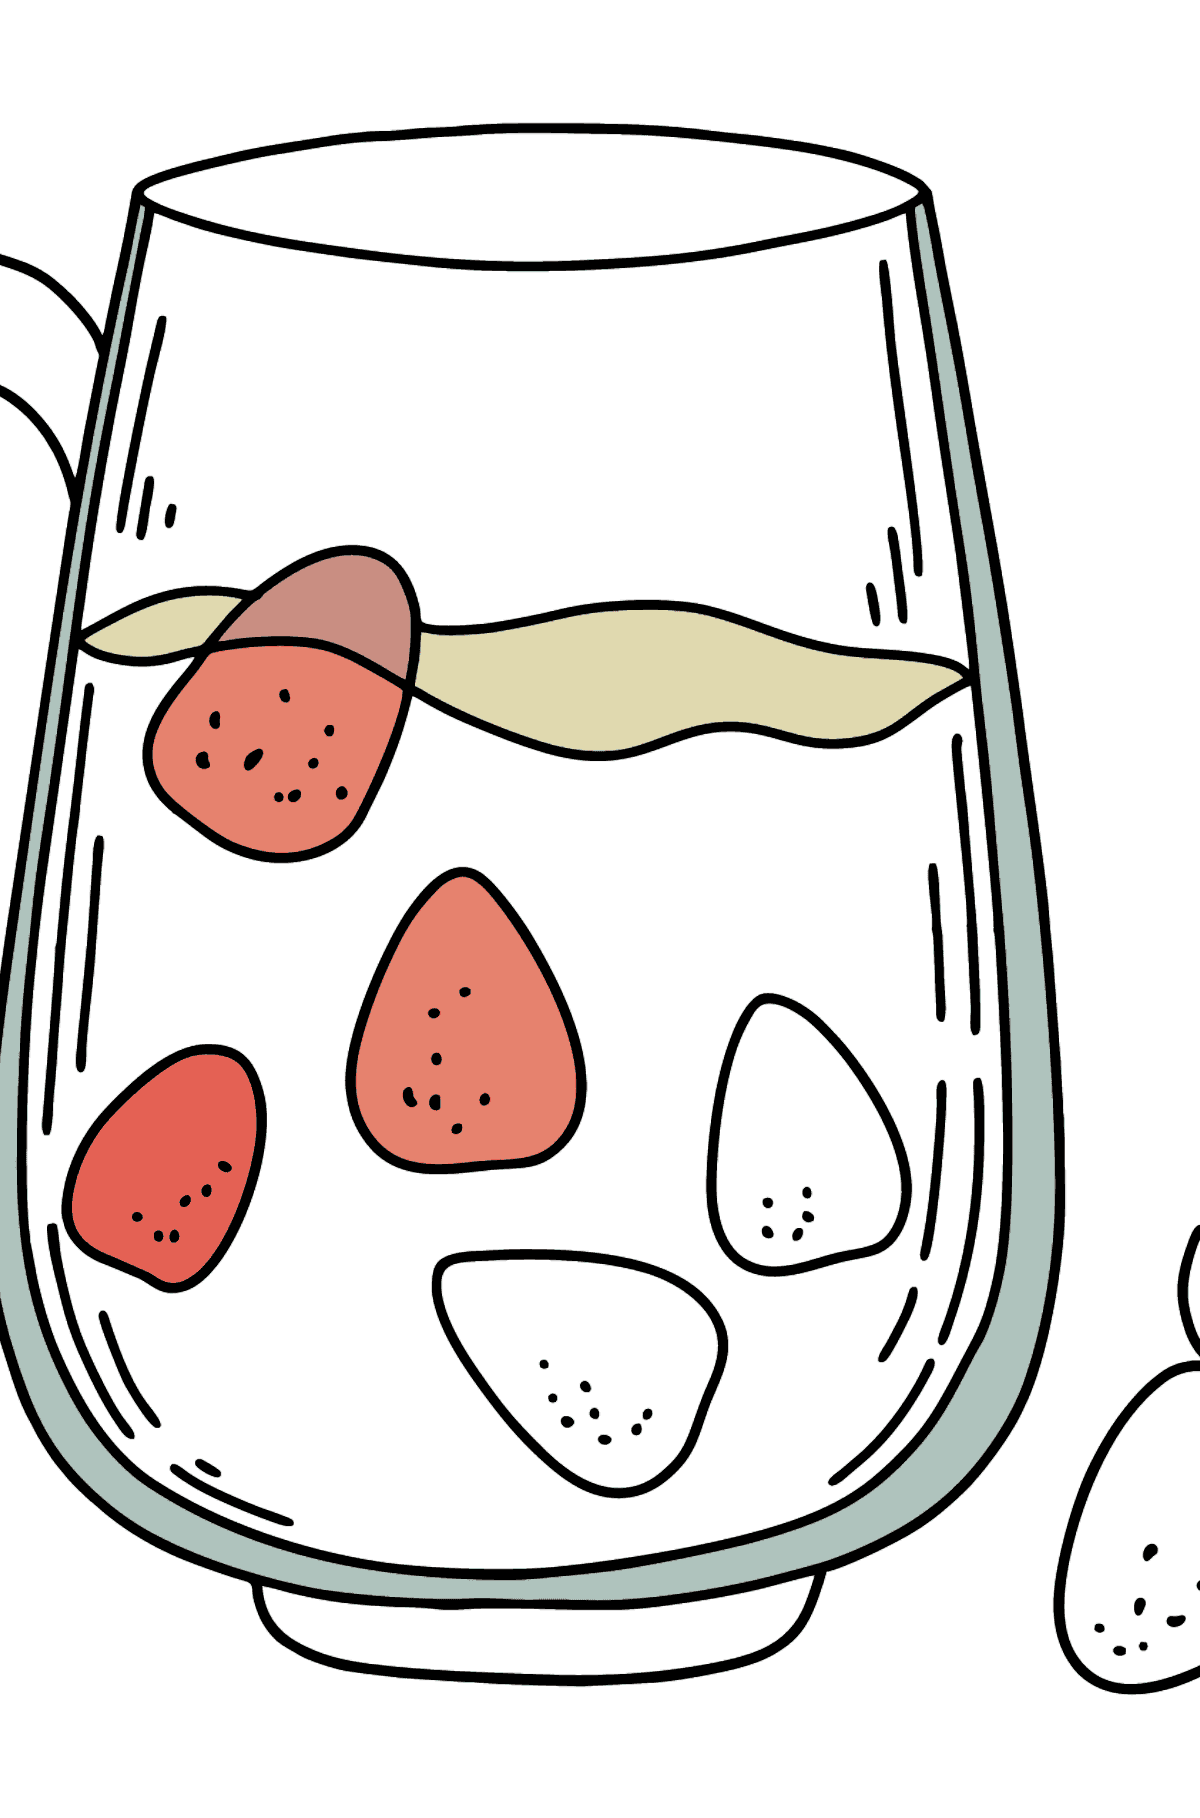 Milk with Berries coloring page - Coloring Pages for Kids